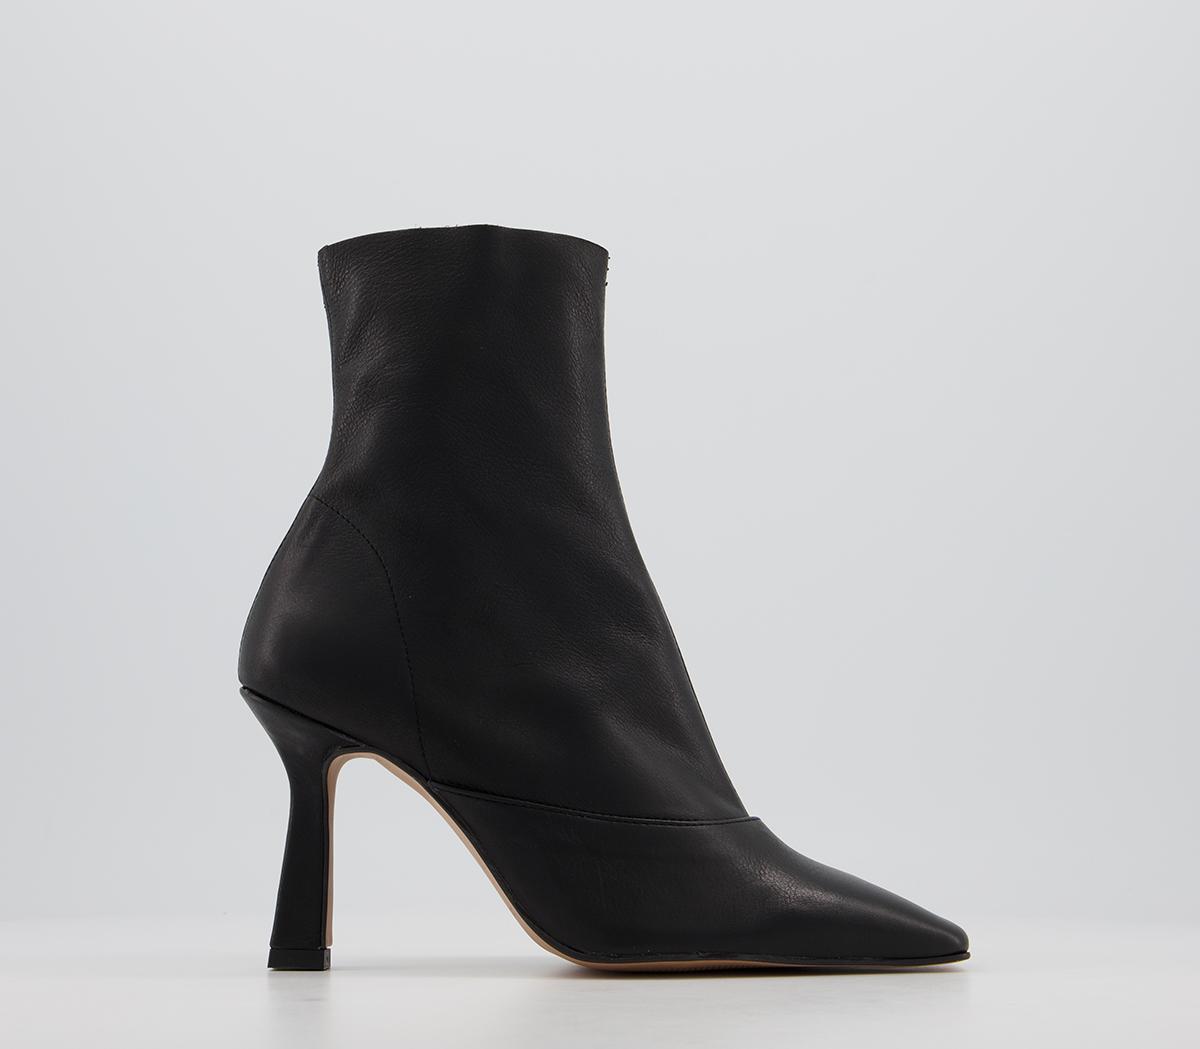 OFFICEAria Dressy Square Toe BootsBlack Leather